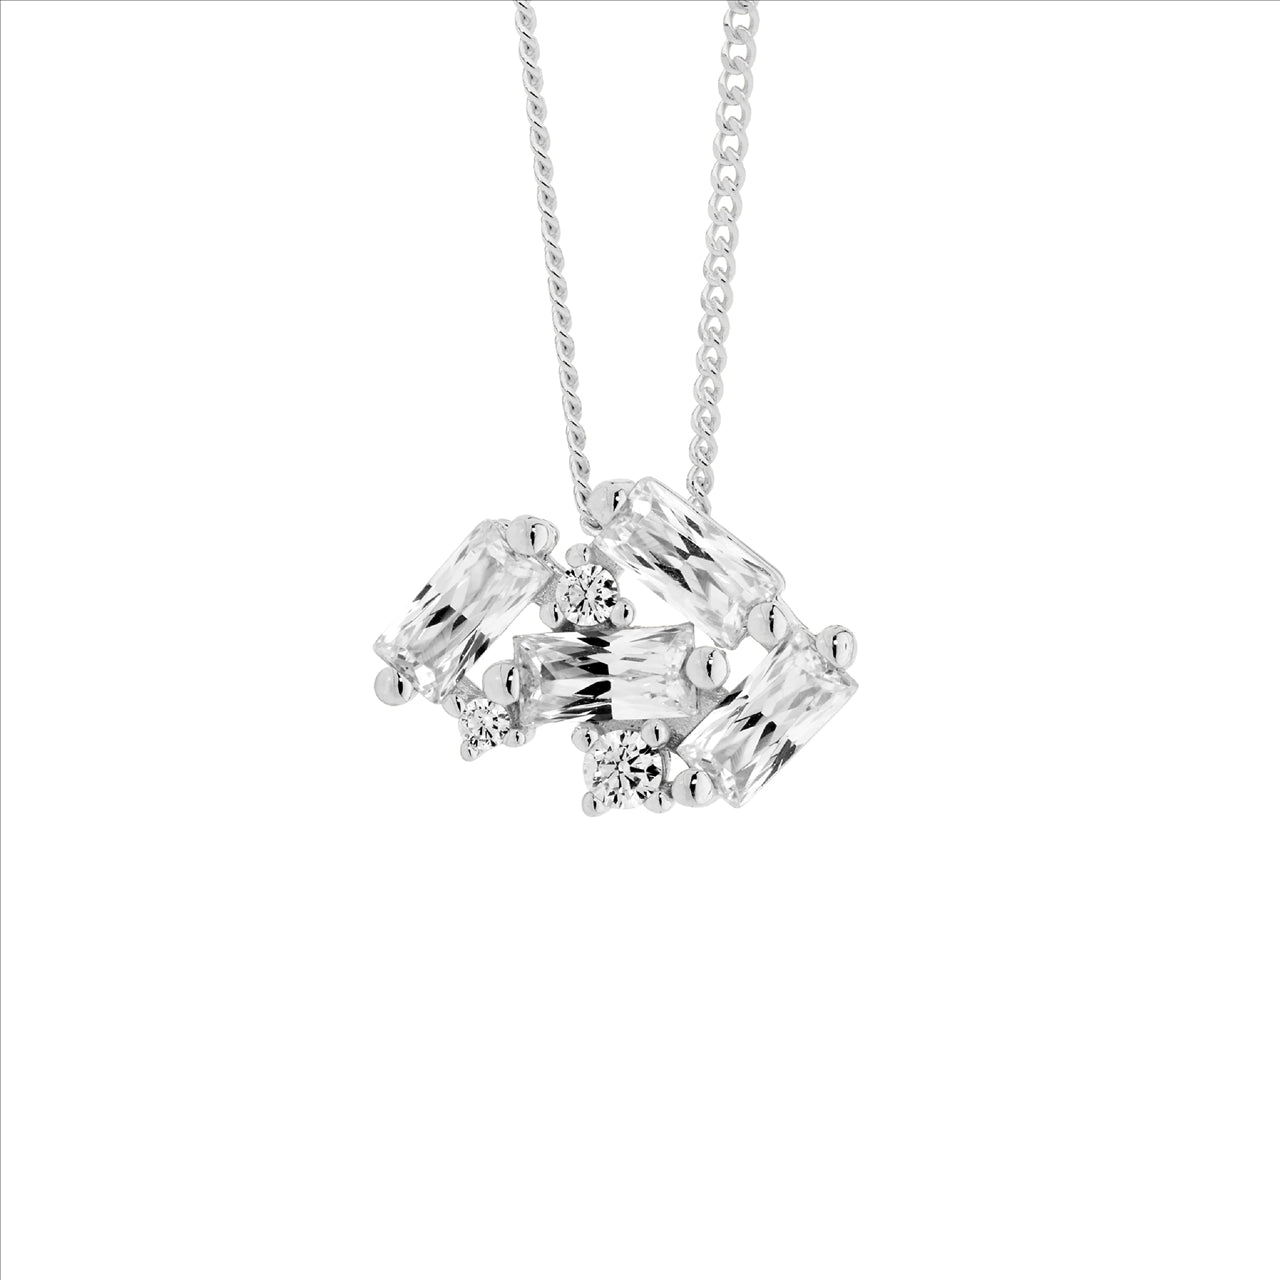 Baguette Cubic Zirconia Staggered Necklace - Sterling Silver.